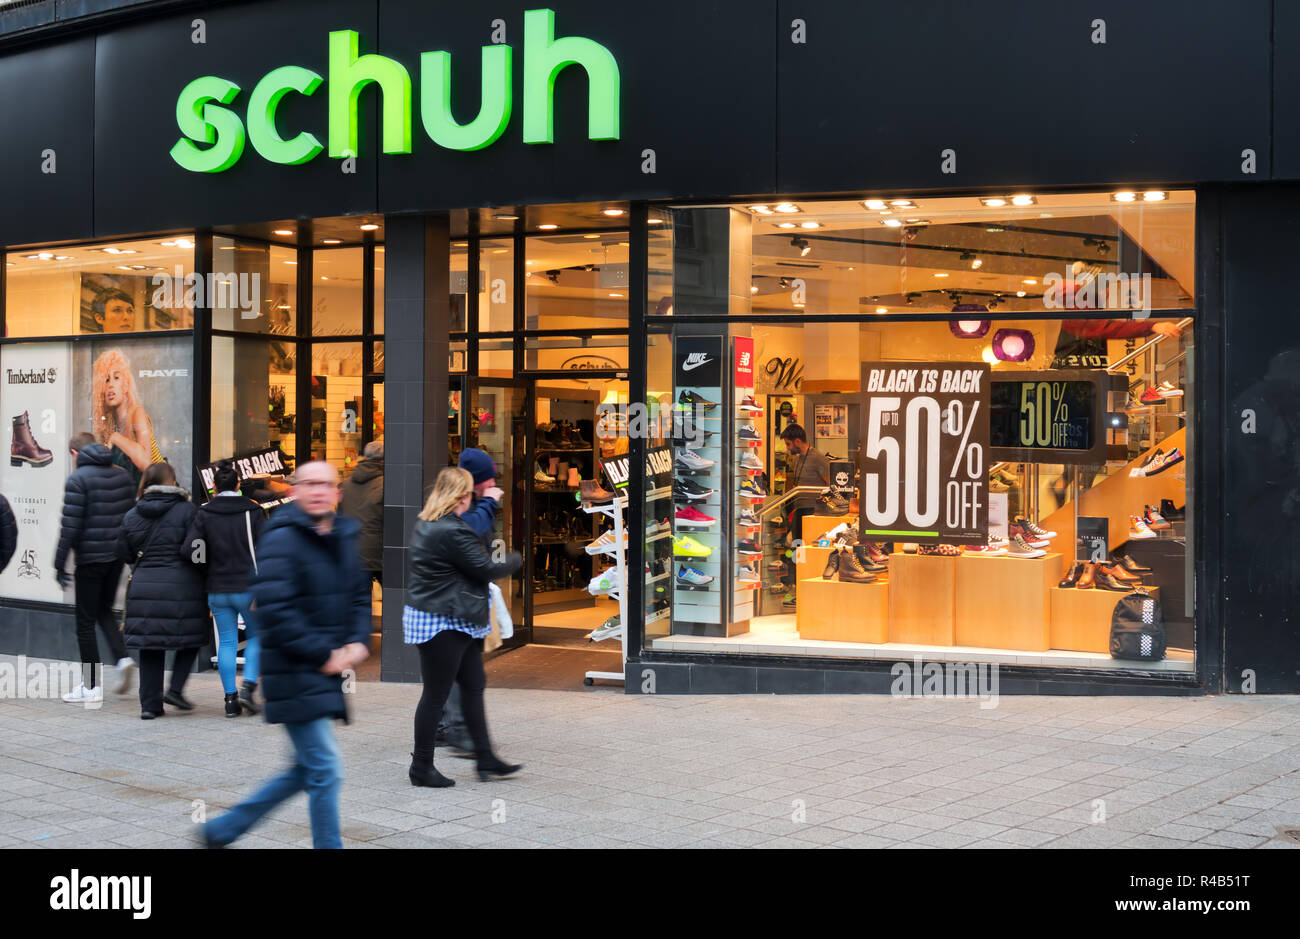 Schuh High Resolution Stock Photography and Images - Alamy